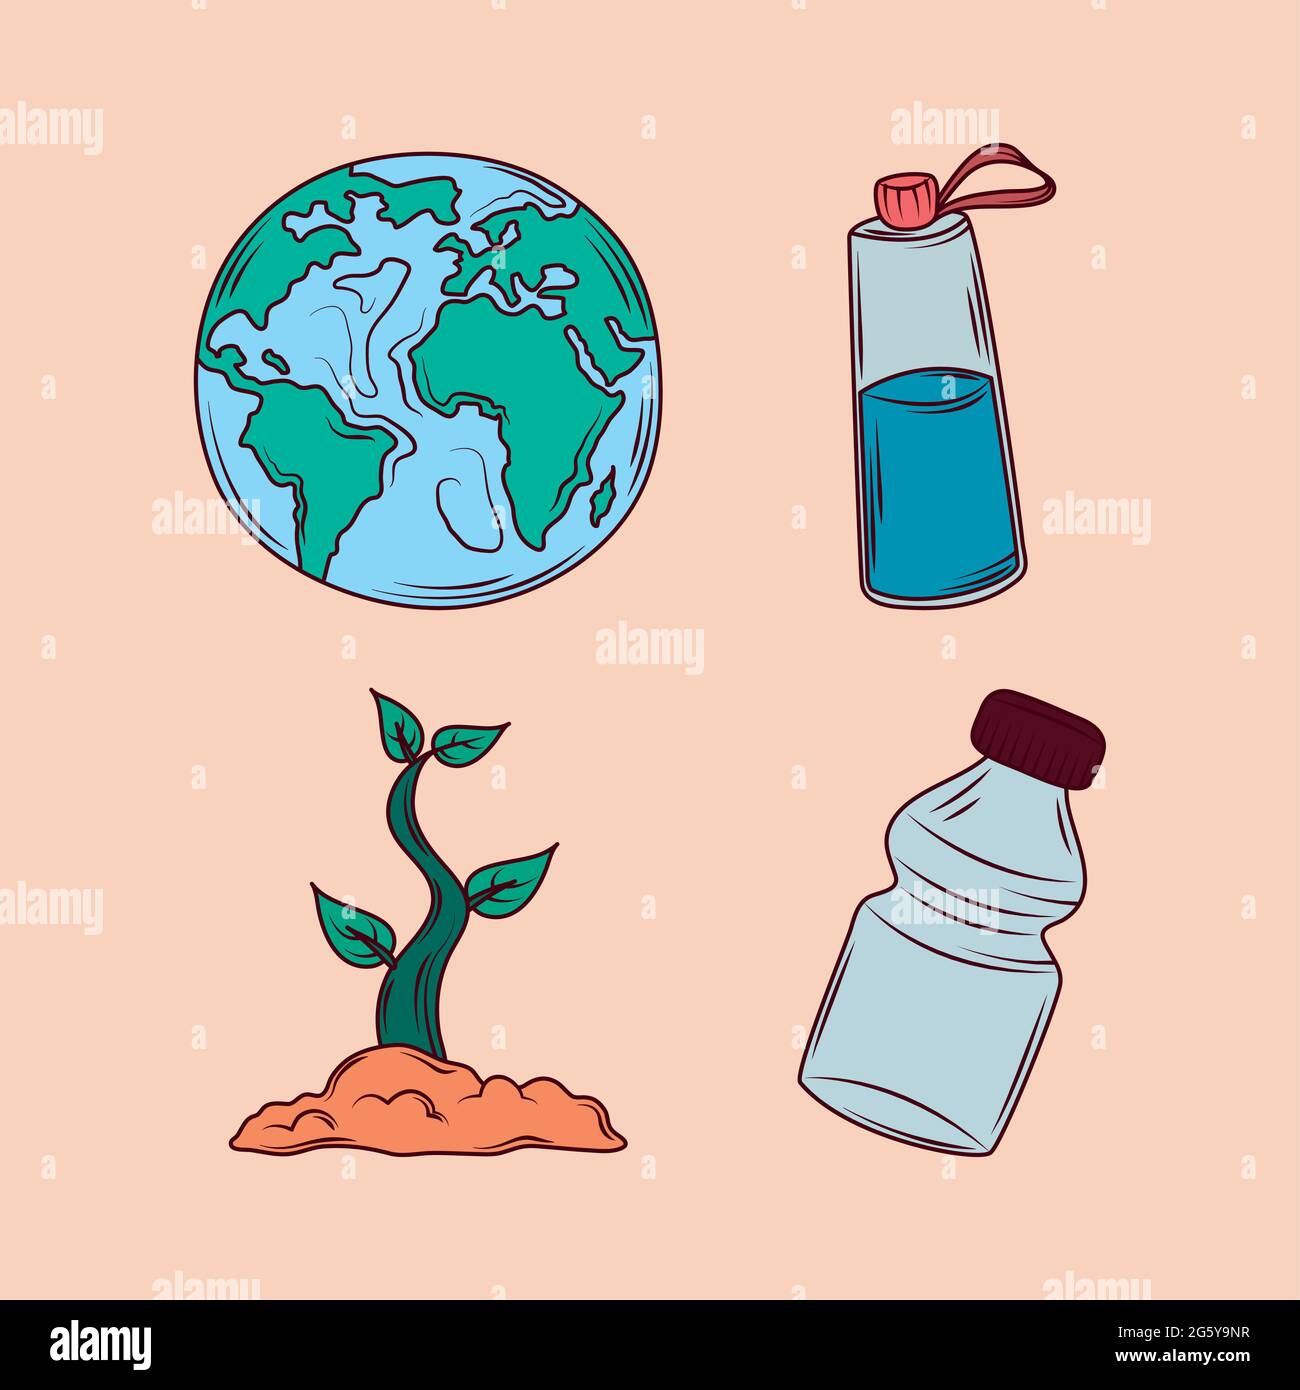 save the planet set Stock Vector